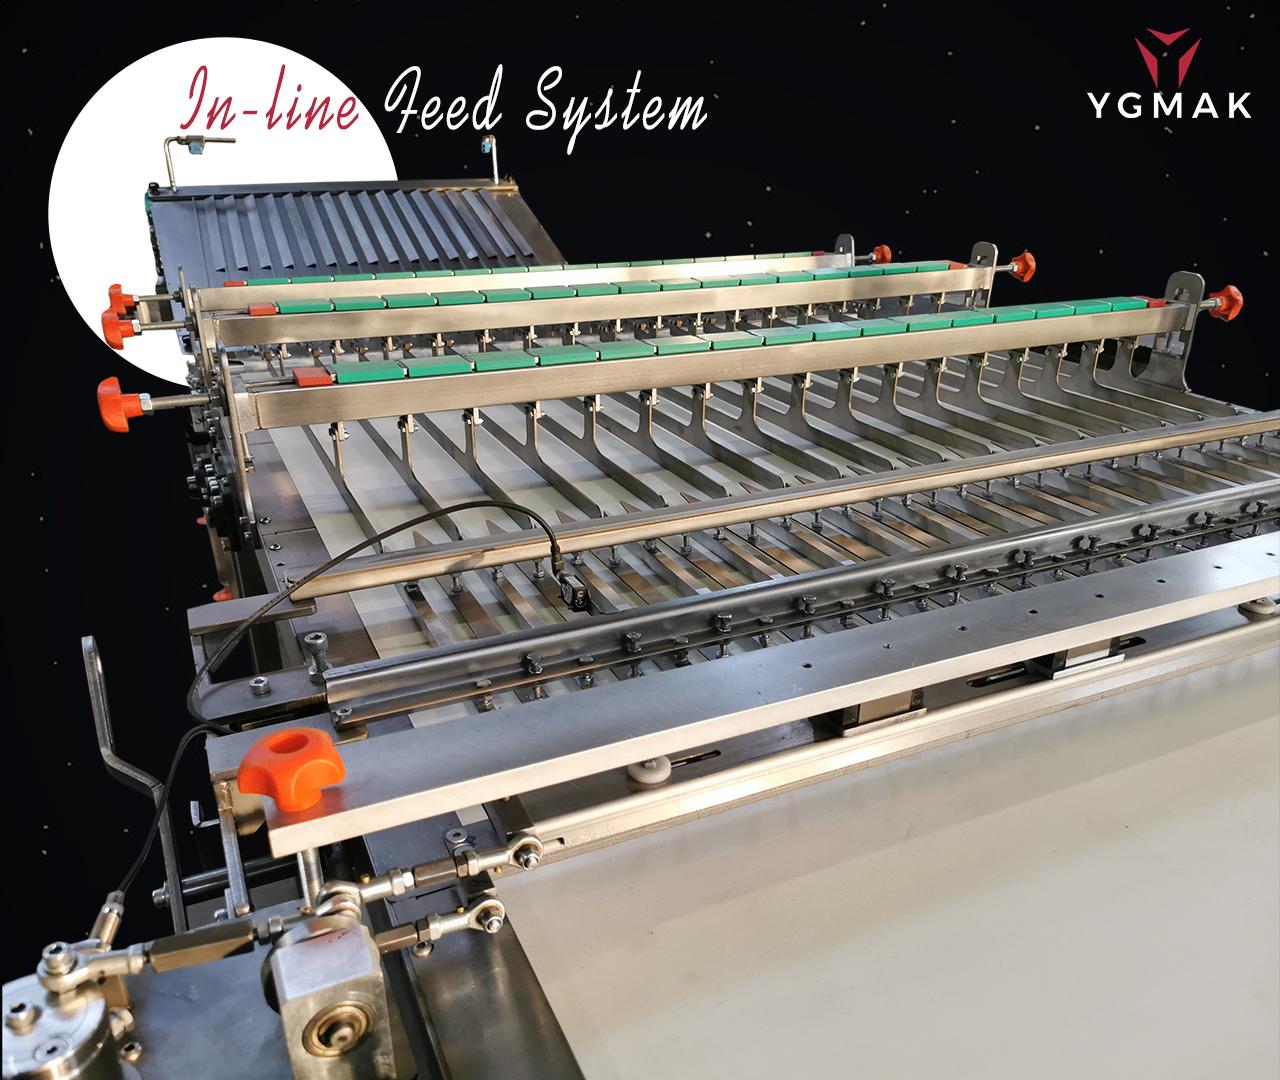 In-line Feed Systems